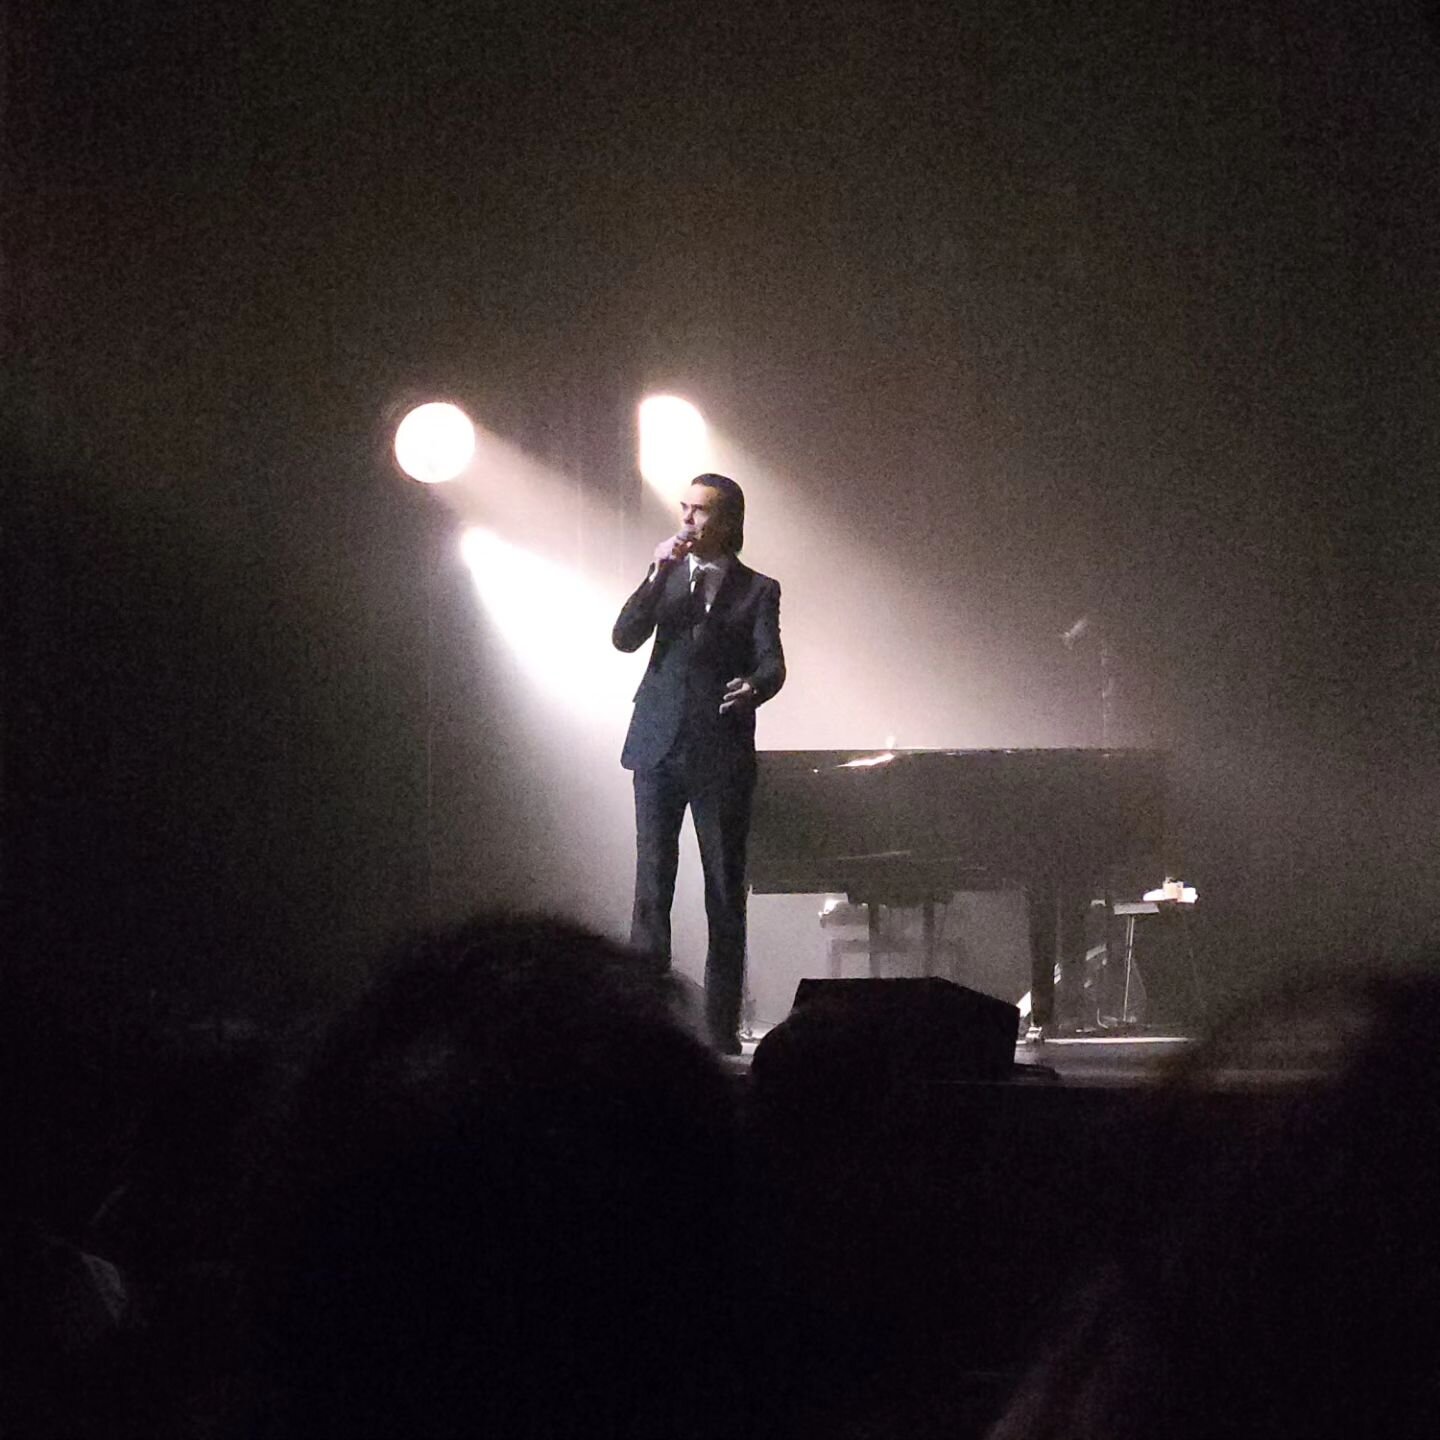 Tonight's entertainment: Nick Cave solo at the @orpheumtheatrela, just a piano and a bass. Absolutely beautiful and powerful. Also, I didn't know how hilarious he is with the audience banter! So glad I caught this tour.

#nickcave #concert #concerts 